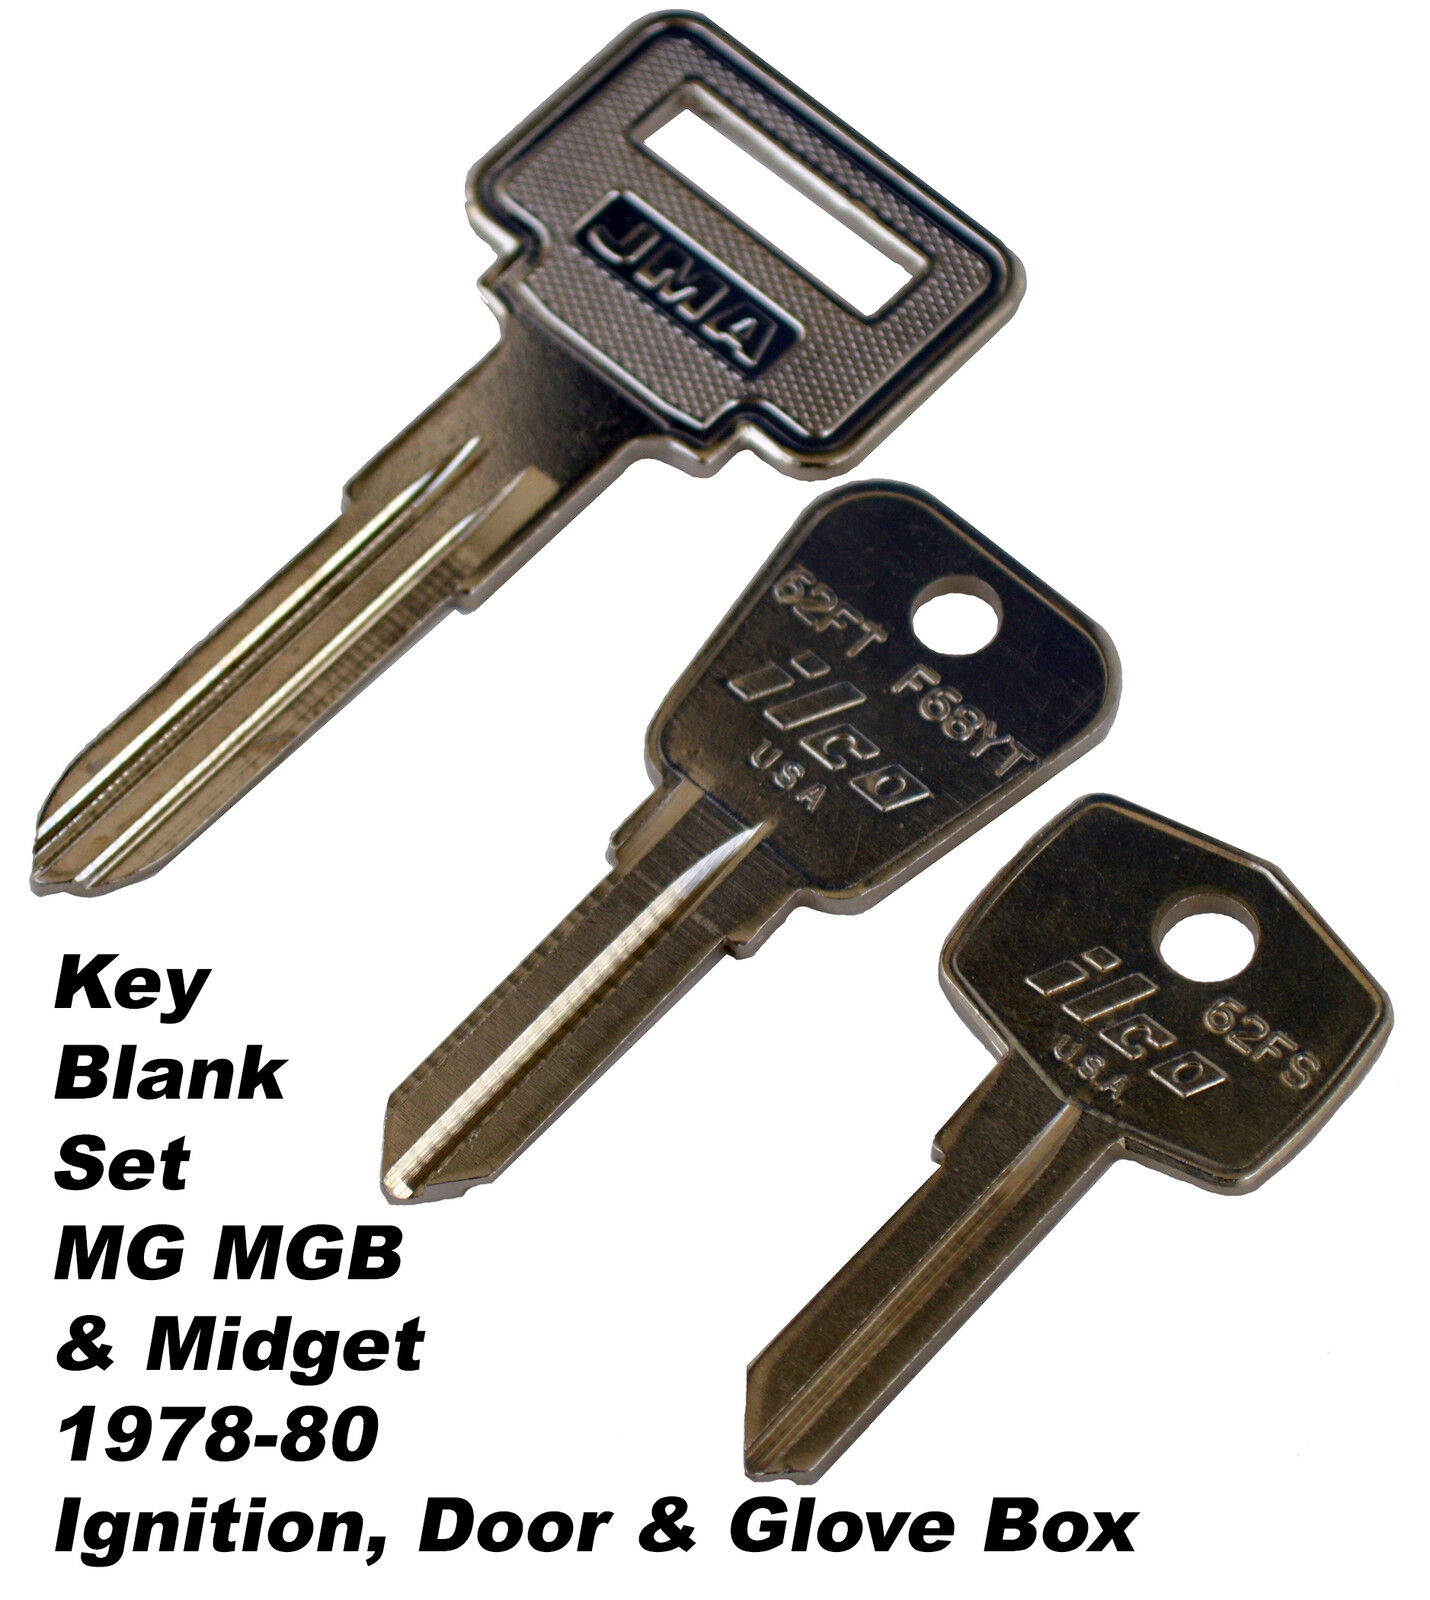 Key blank set for MG MGB Midget 78 - 80 for cars with original ignition switch